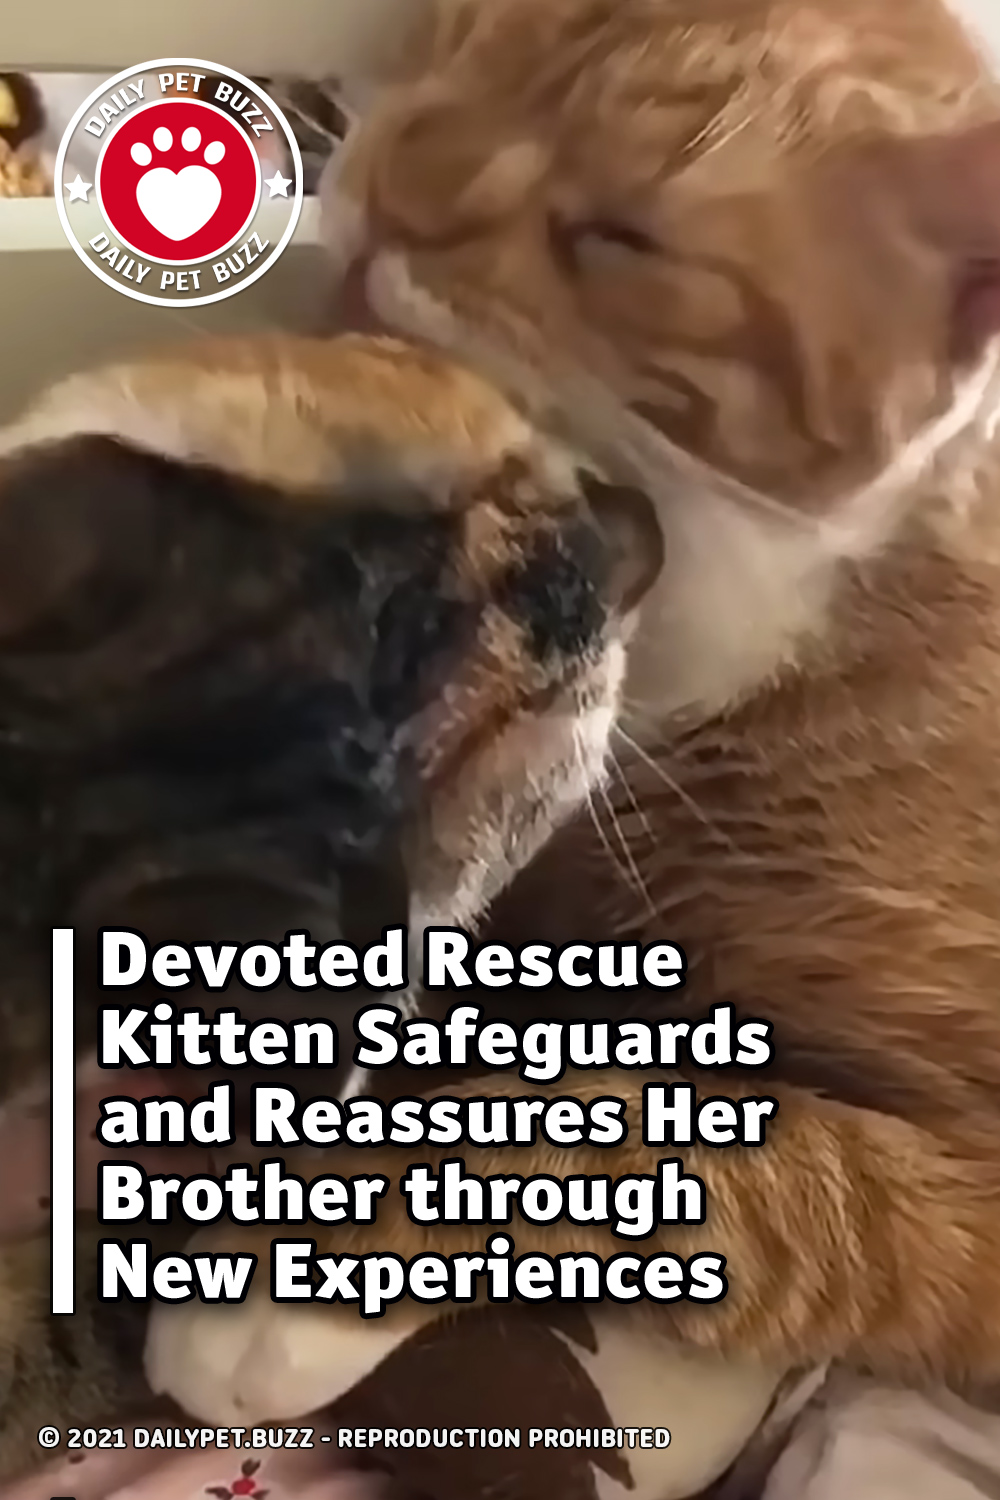 Devoted Rescue Kitten Safeguards and Reassures Her Brother through New Experiences